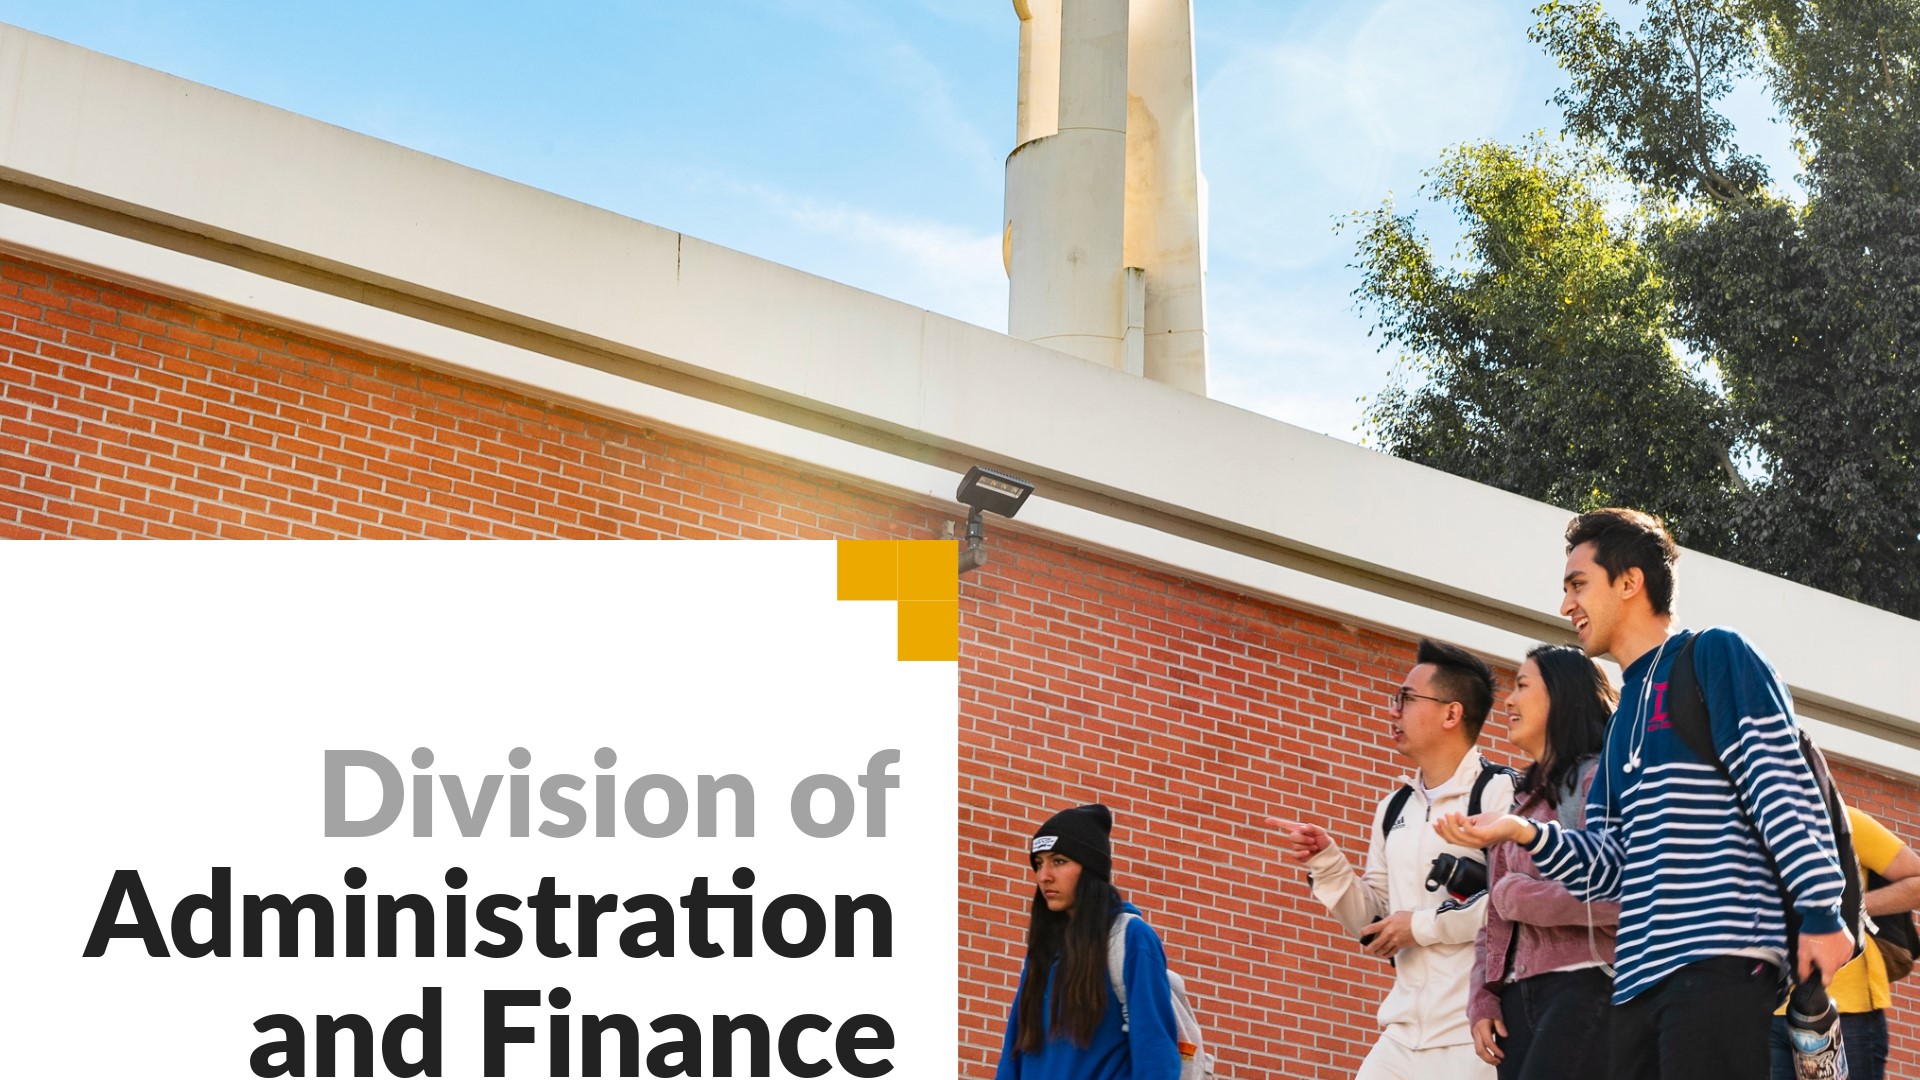 Division of Administration and Finance. Image shows students walking on campus. 